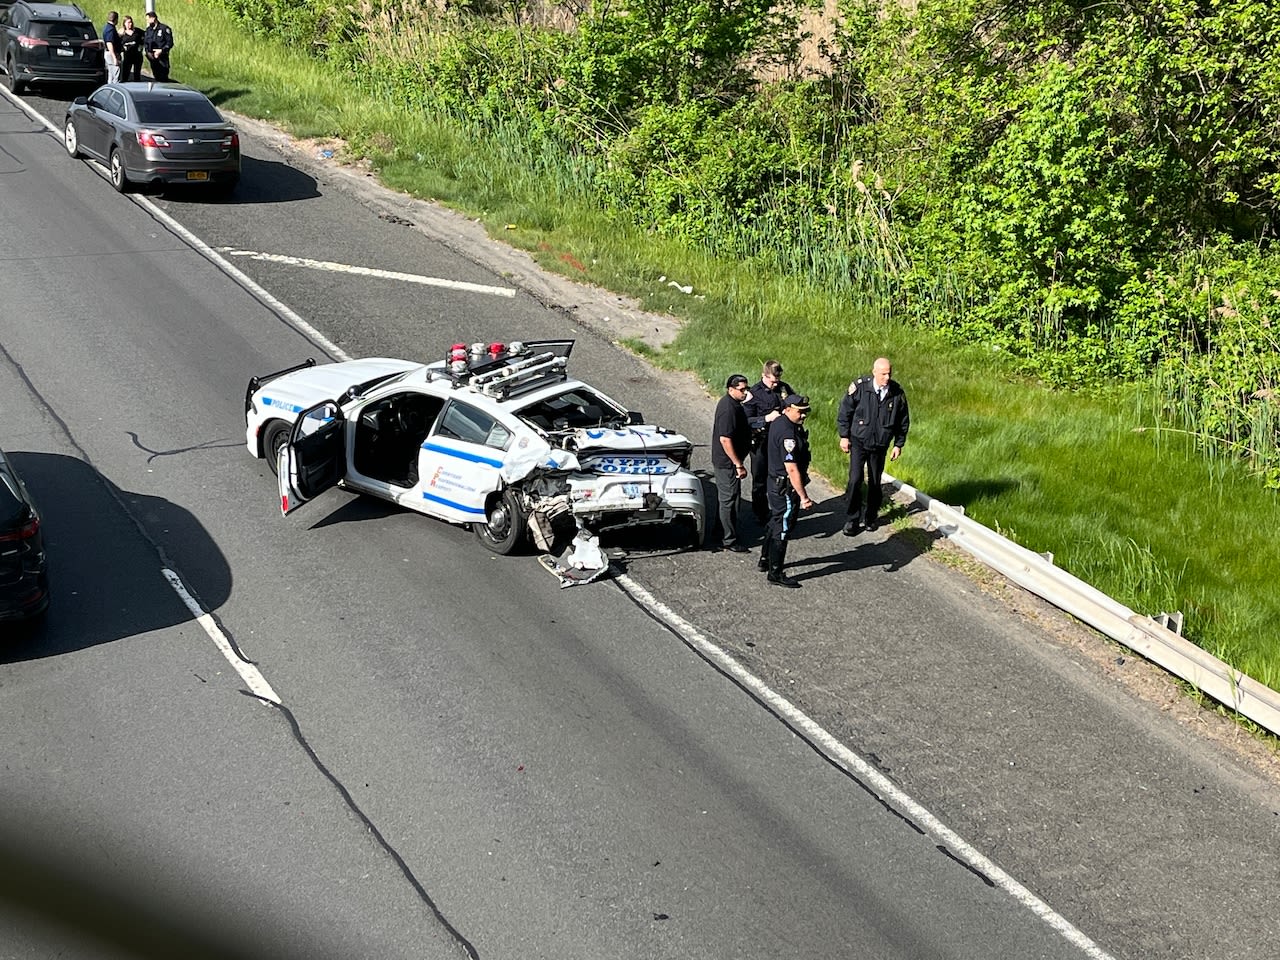 NYPD: Officer injured in hit-run crash on West Shore Expressway